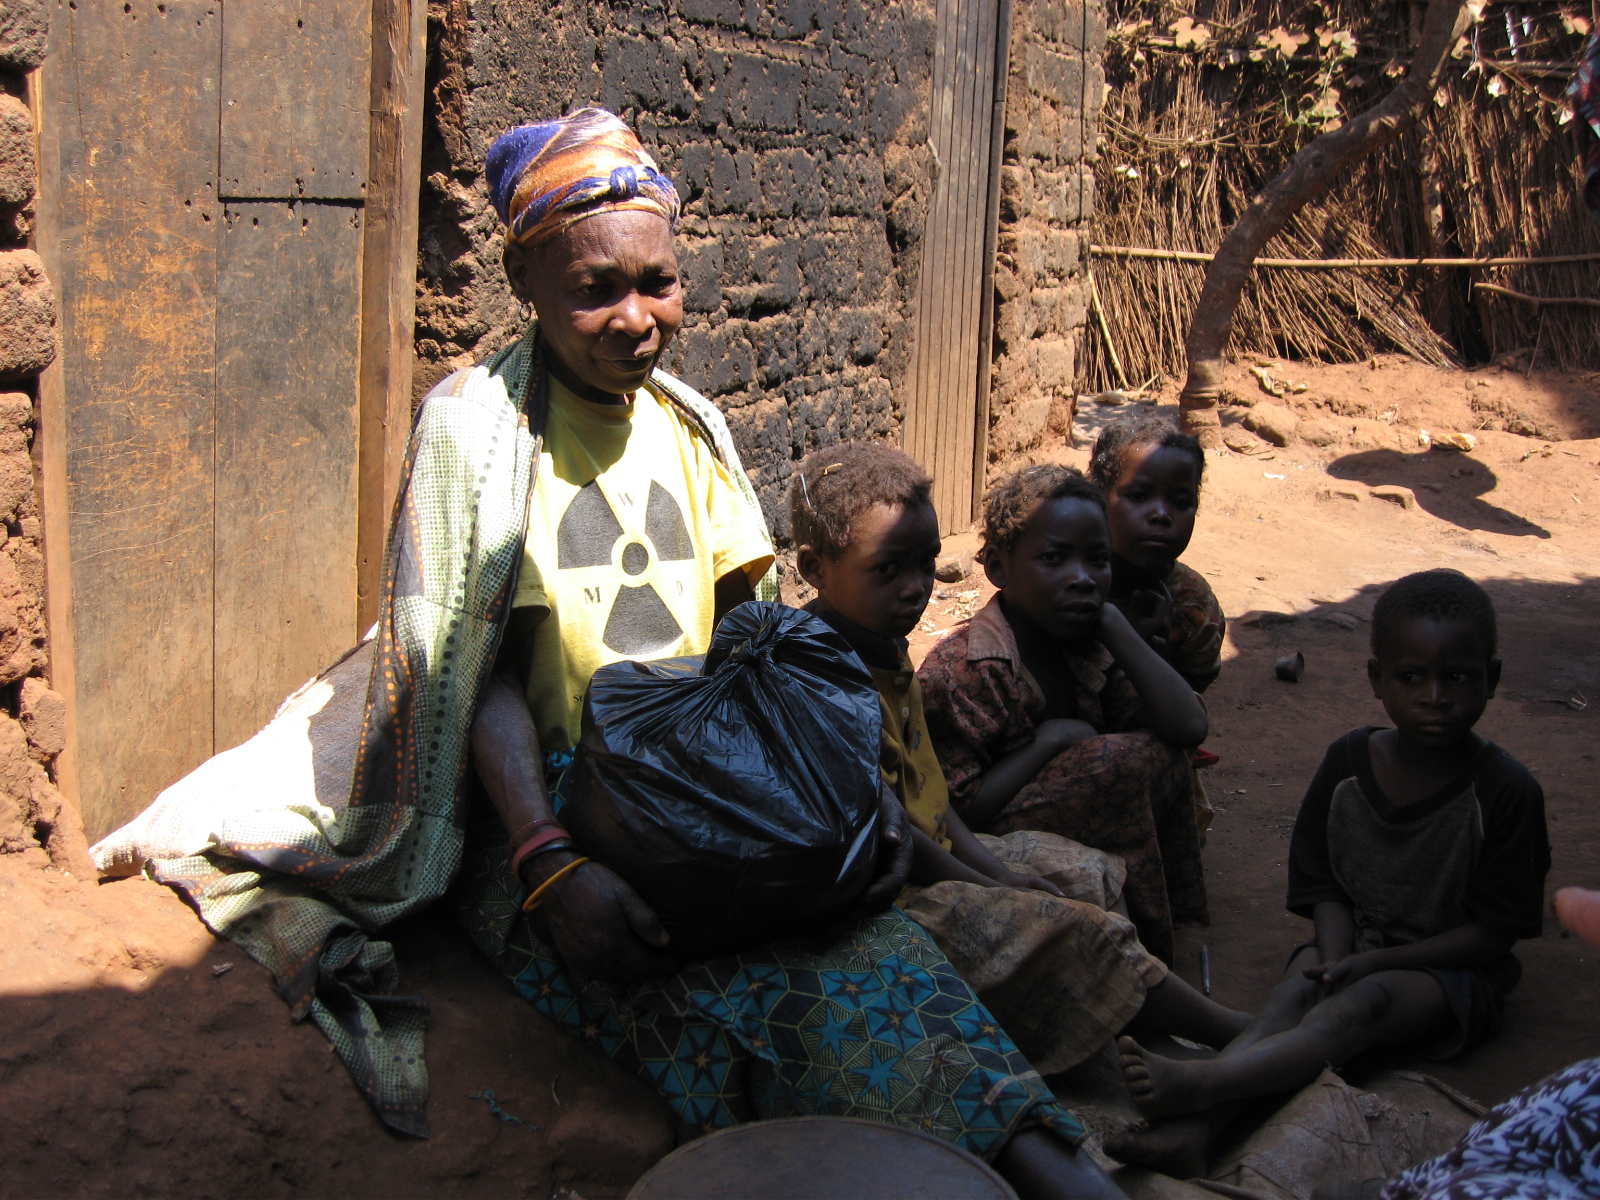 Older African woman sitting on the ground by a rough, brick building and a black plastic bag in her lap, surrounded by four young children.